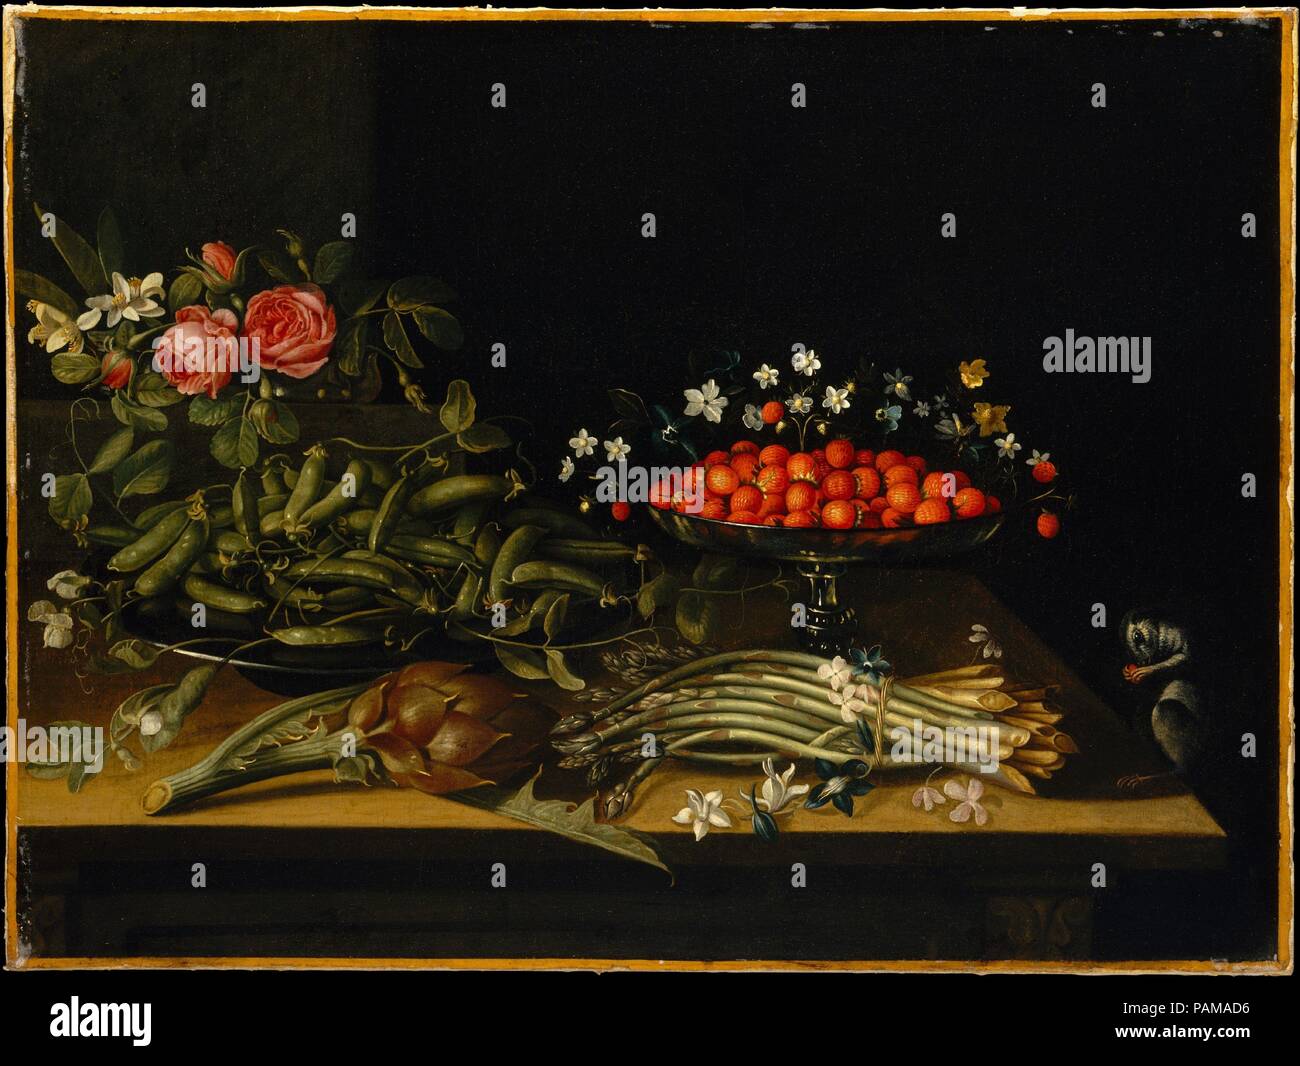 Still Life with Strawberries. Artist: French Painter (17th century). Dimensions: 23 5/8 x 31 5/8 in. (60 x 80.3 cm). Museum: Metropolitan Museum of Art, New York, USA. Stock Photo